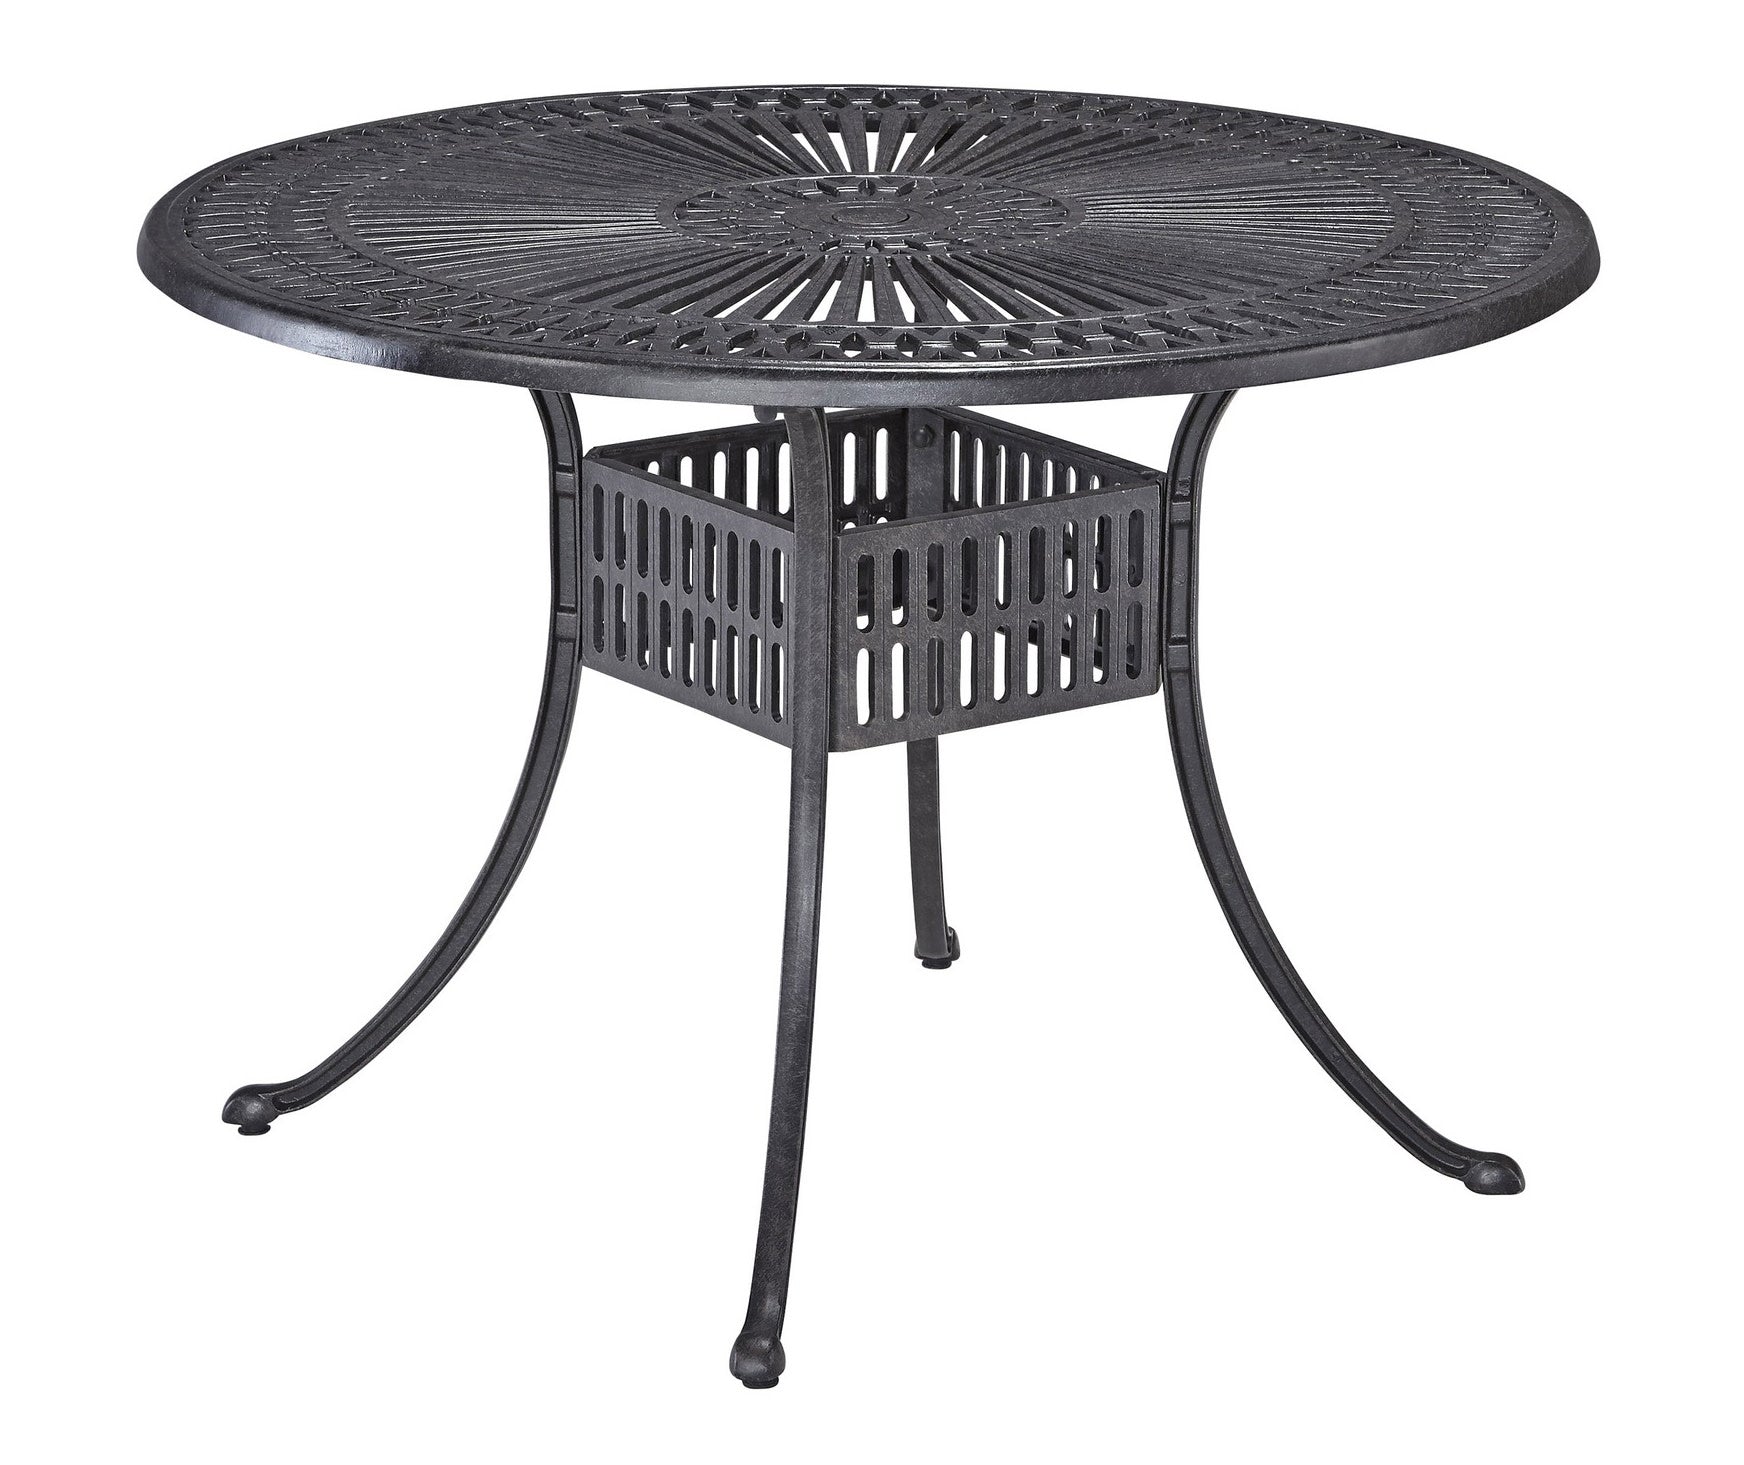 Grenada 5 Piece Outdoor Dining Set by Homestyles - Charcoal - Aluminum, Upholstered, Fabric - 6660-308C